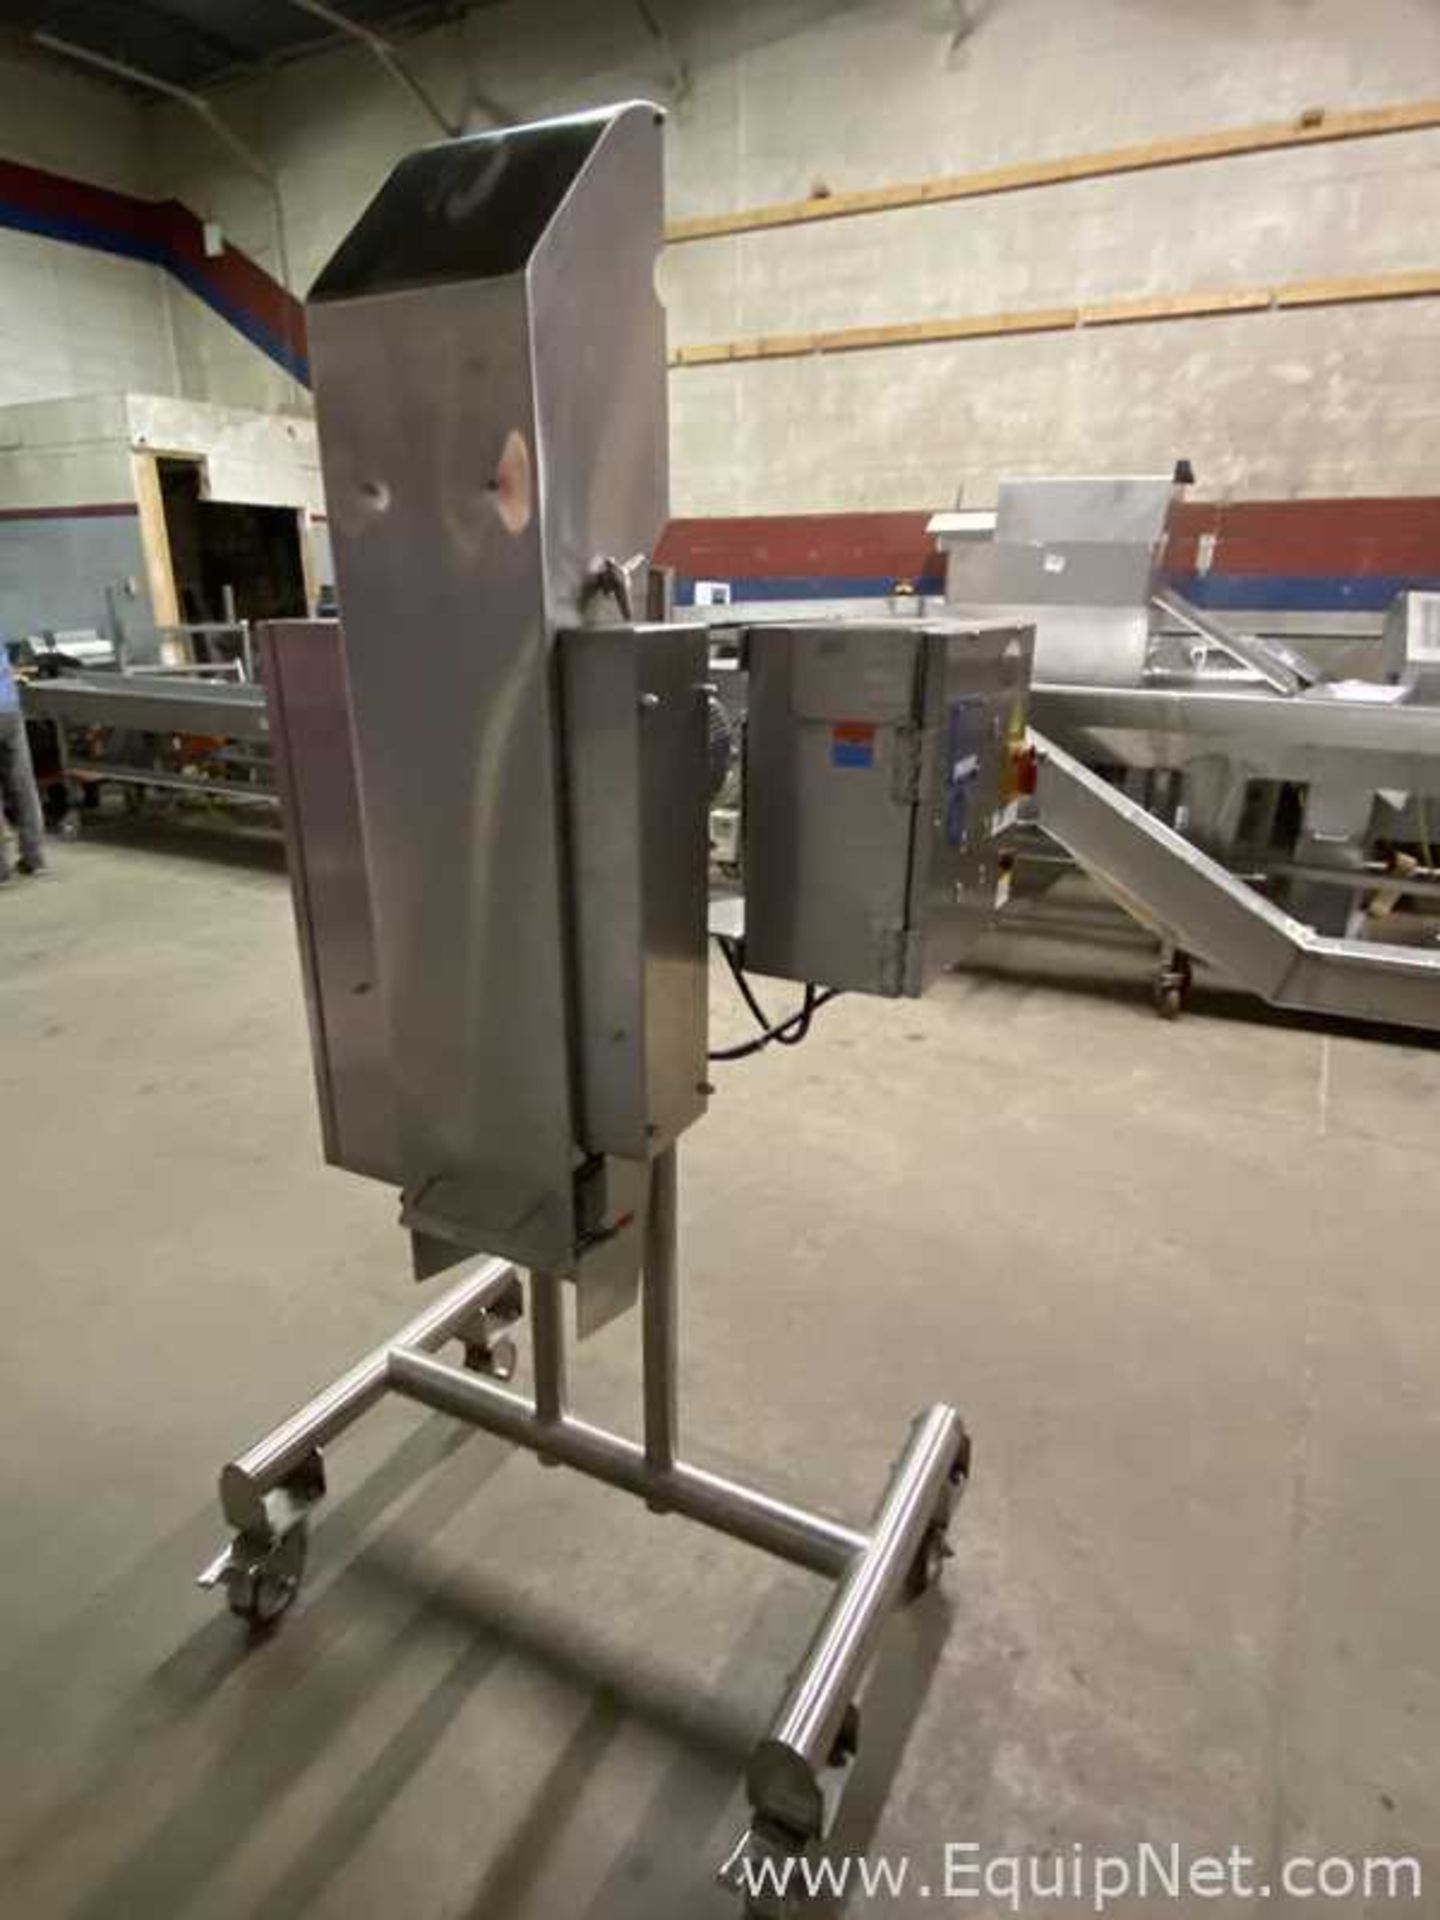 CM Machine Services Meat Shredding Machine With Flighted Incline Conveyor for Shredder - Image 3 of 15